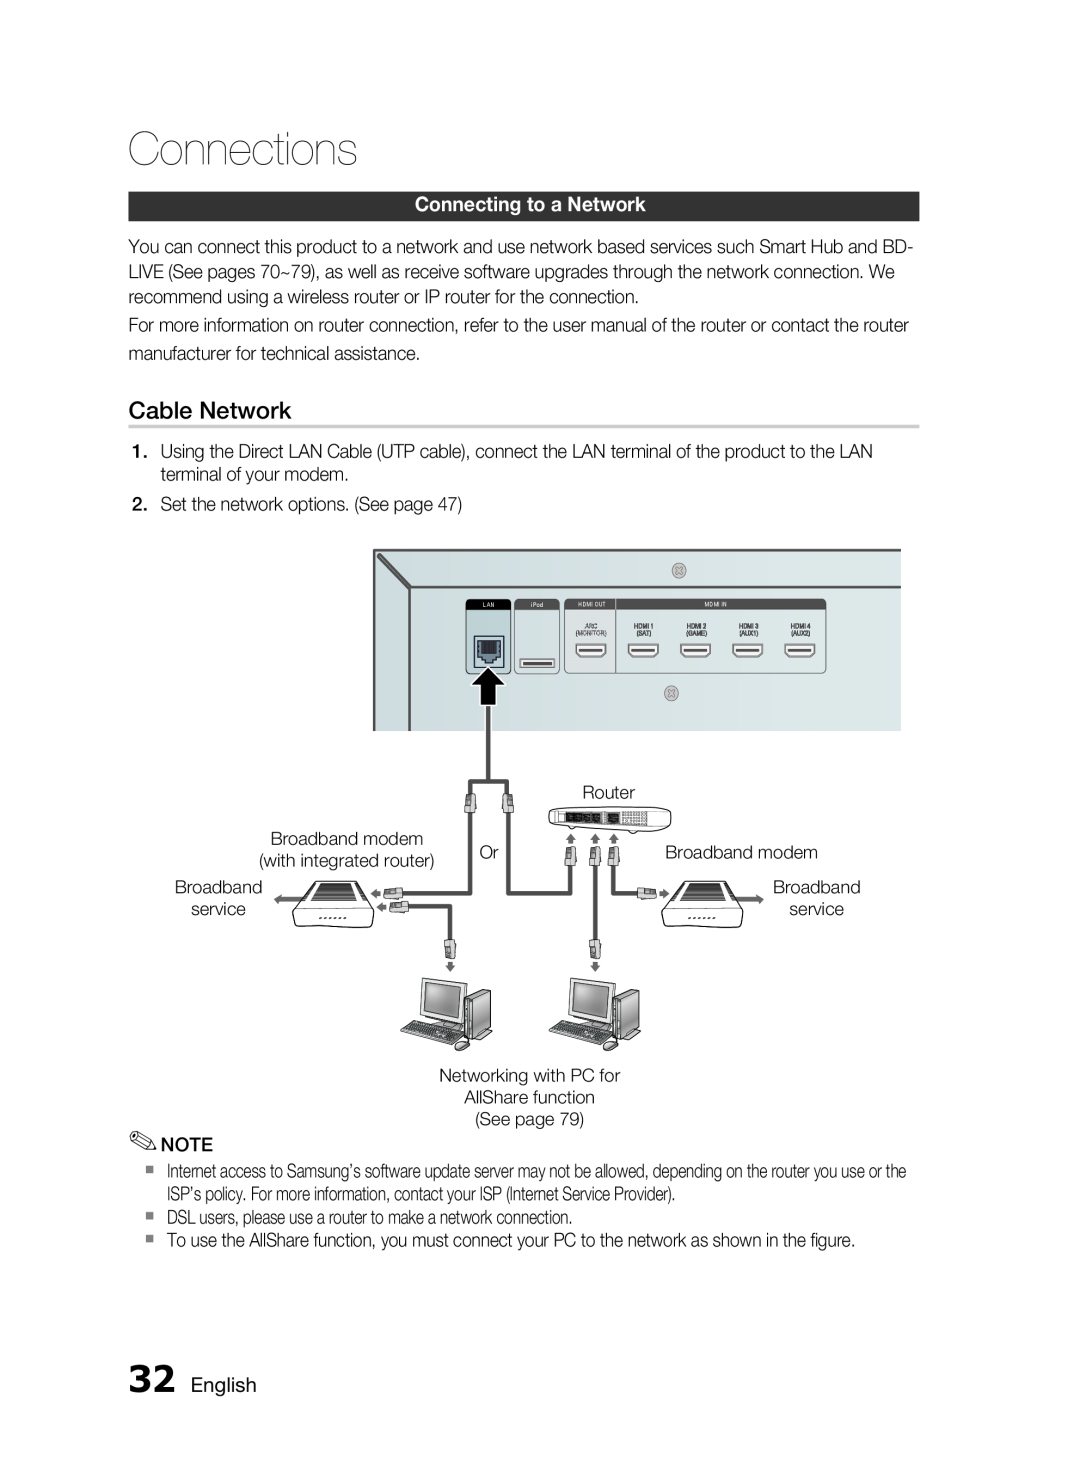 Samsung HW-D7000 user manual Cable Network, Connecting to a Network, Connections 